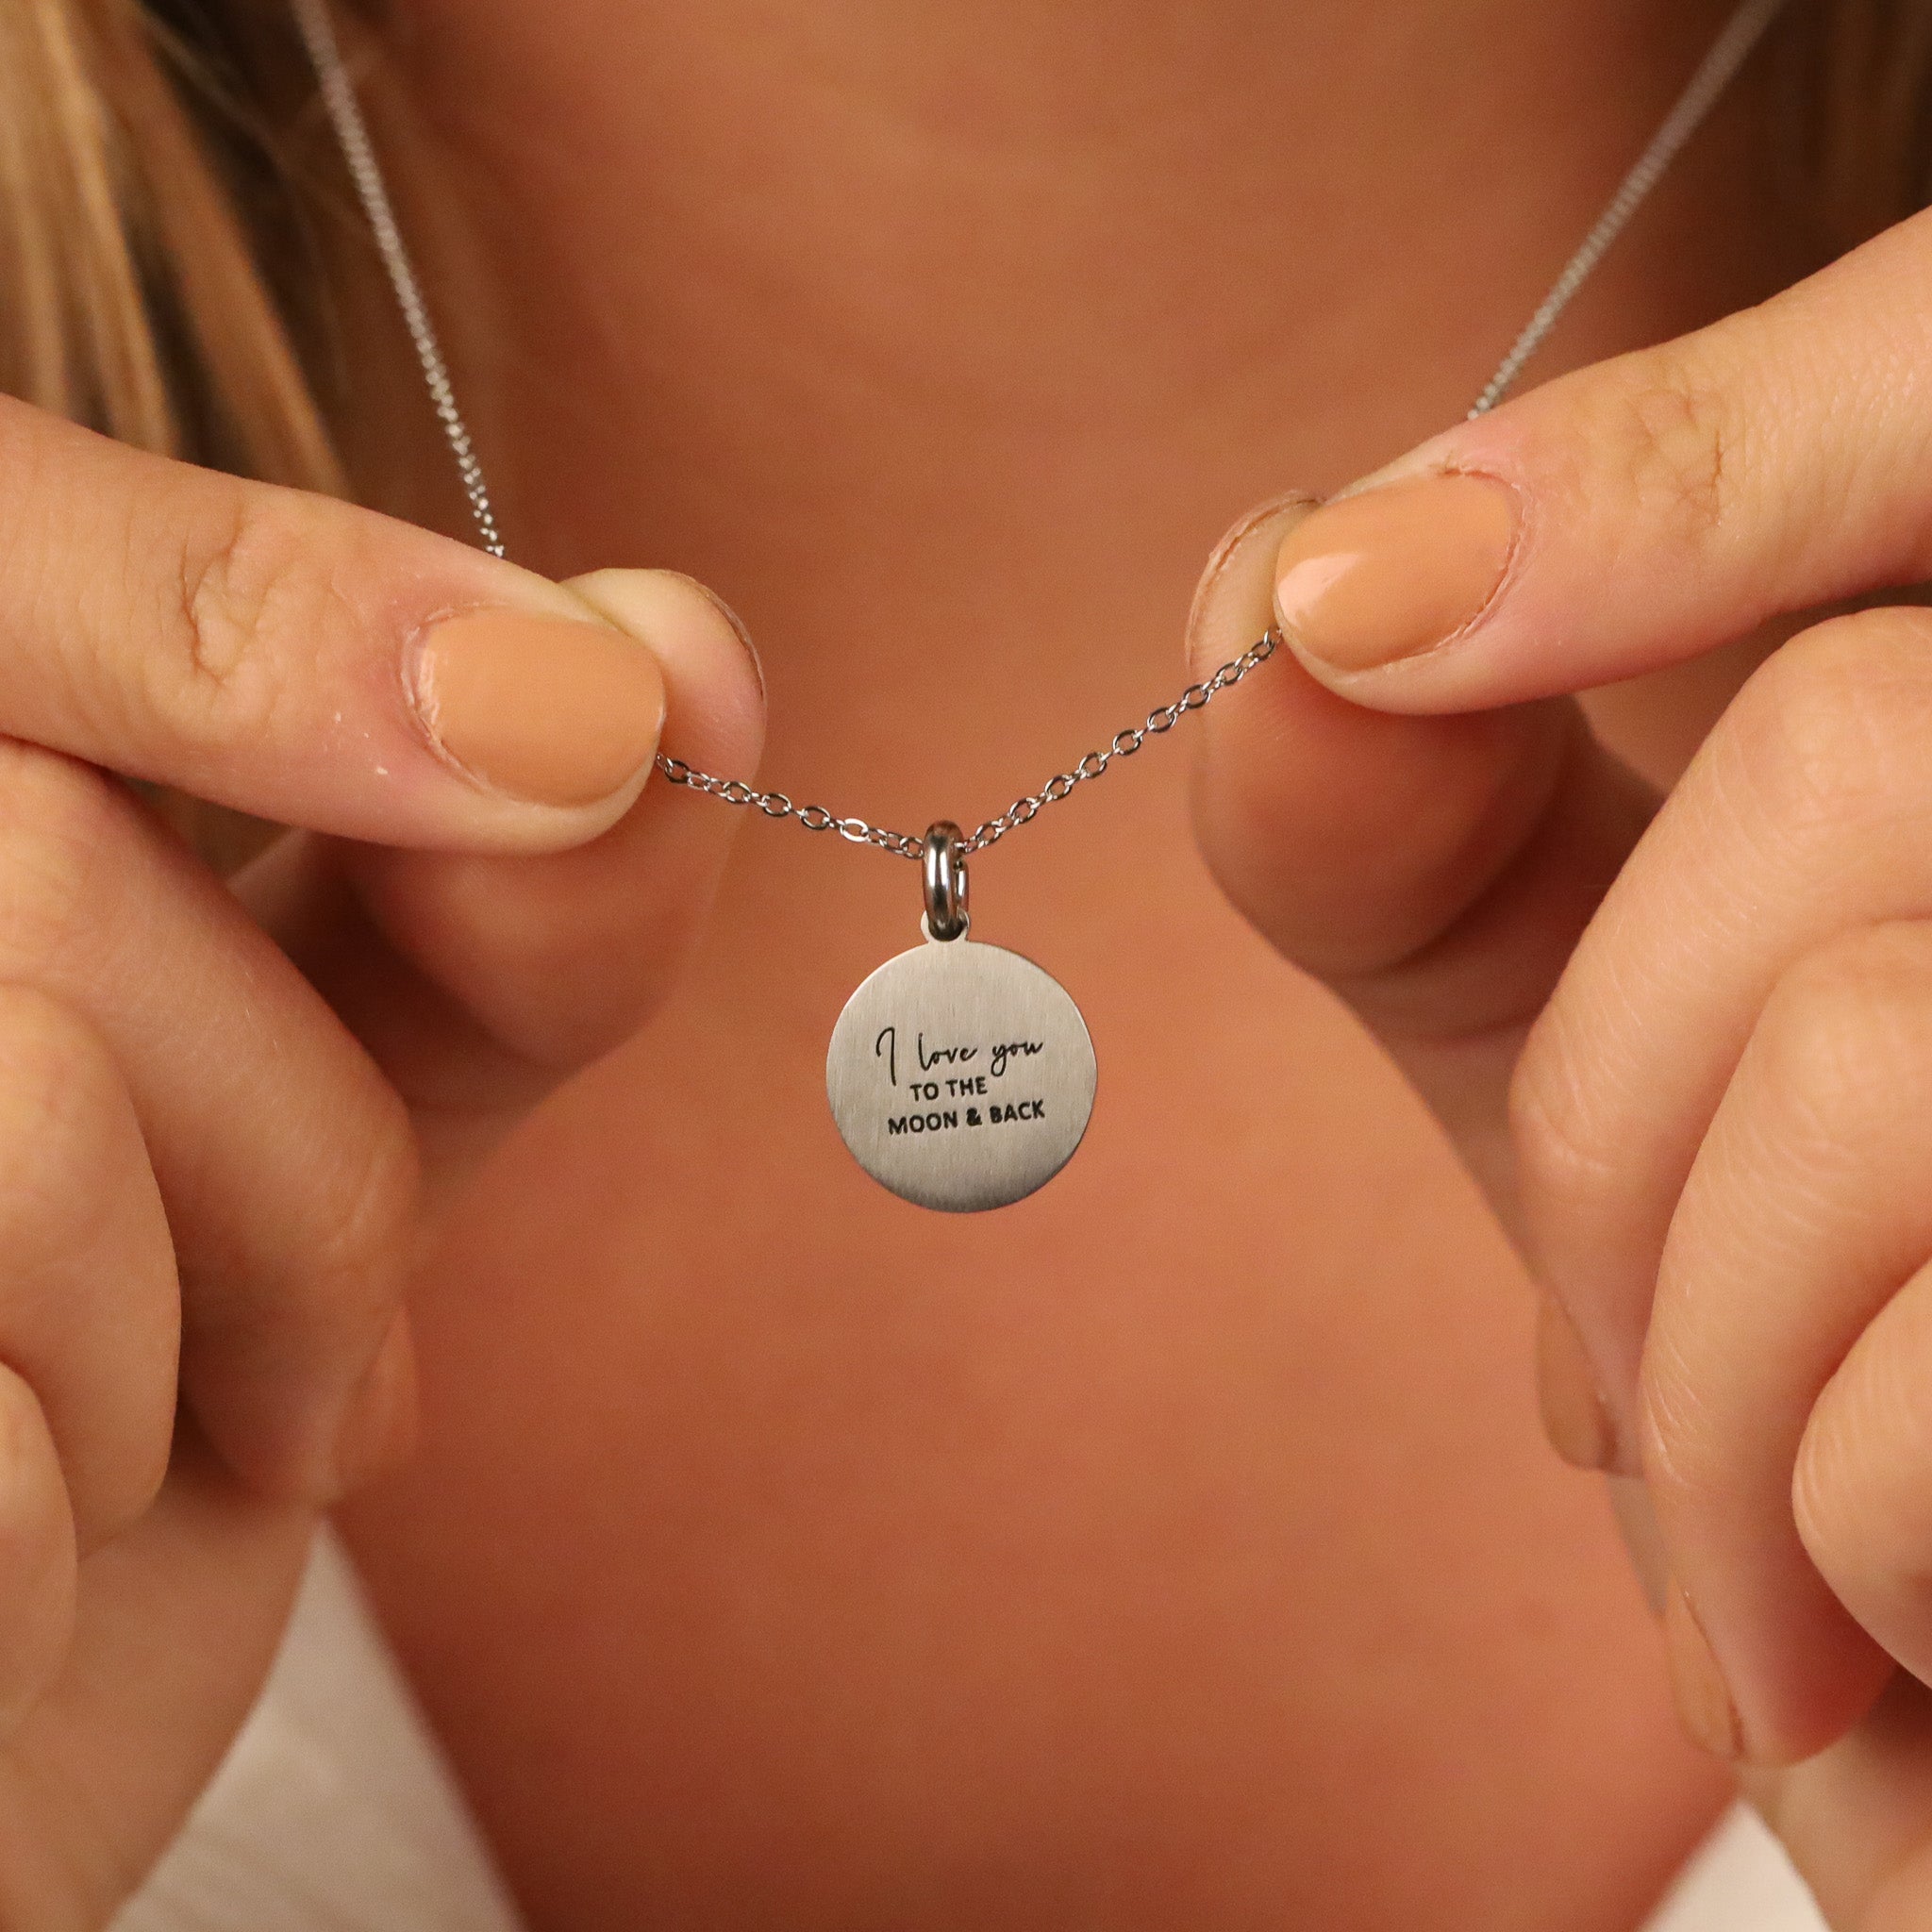 I LOVE YOU TO THE MOON AND BACK PENDANT - Inspiration Co.